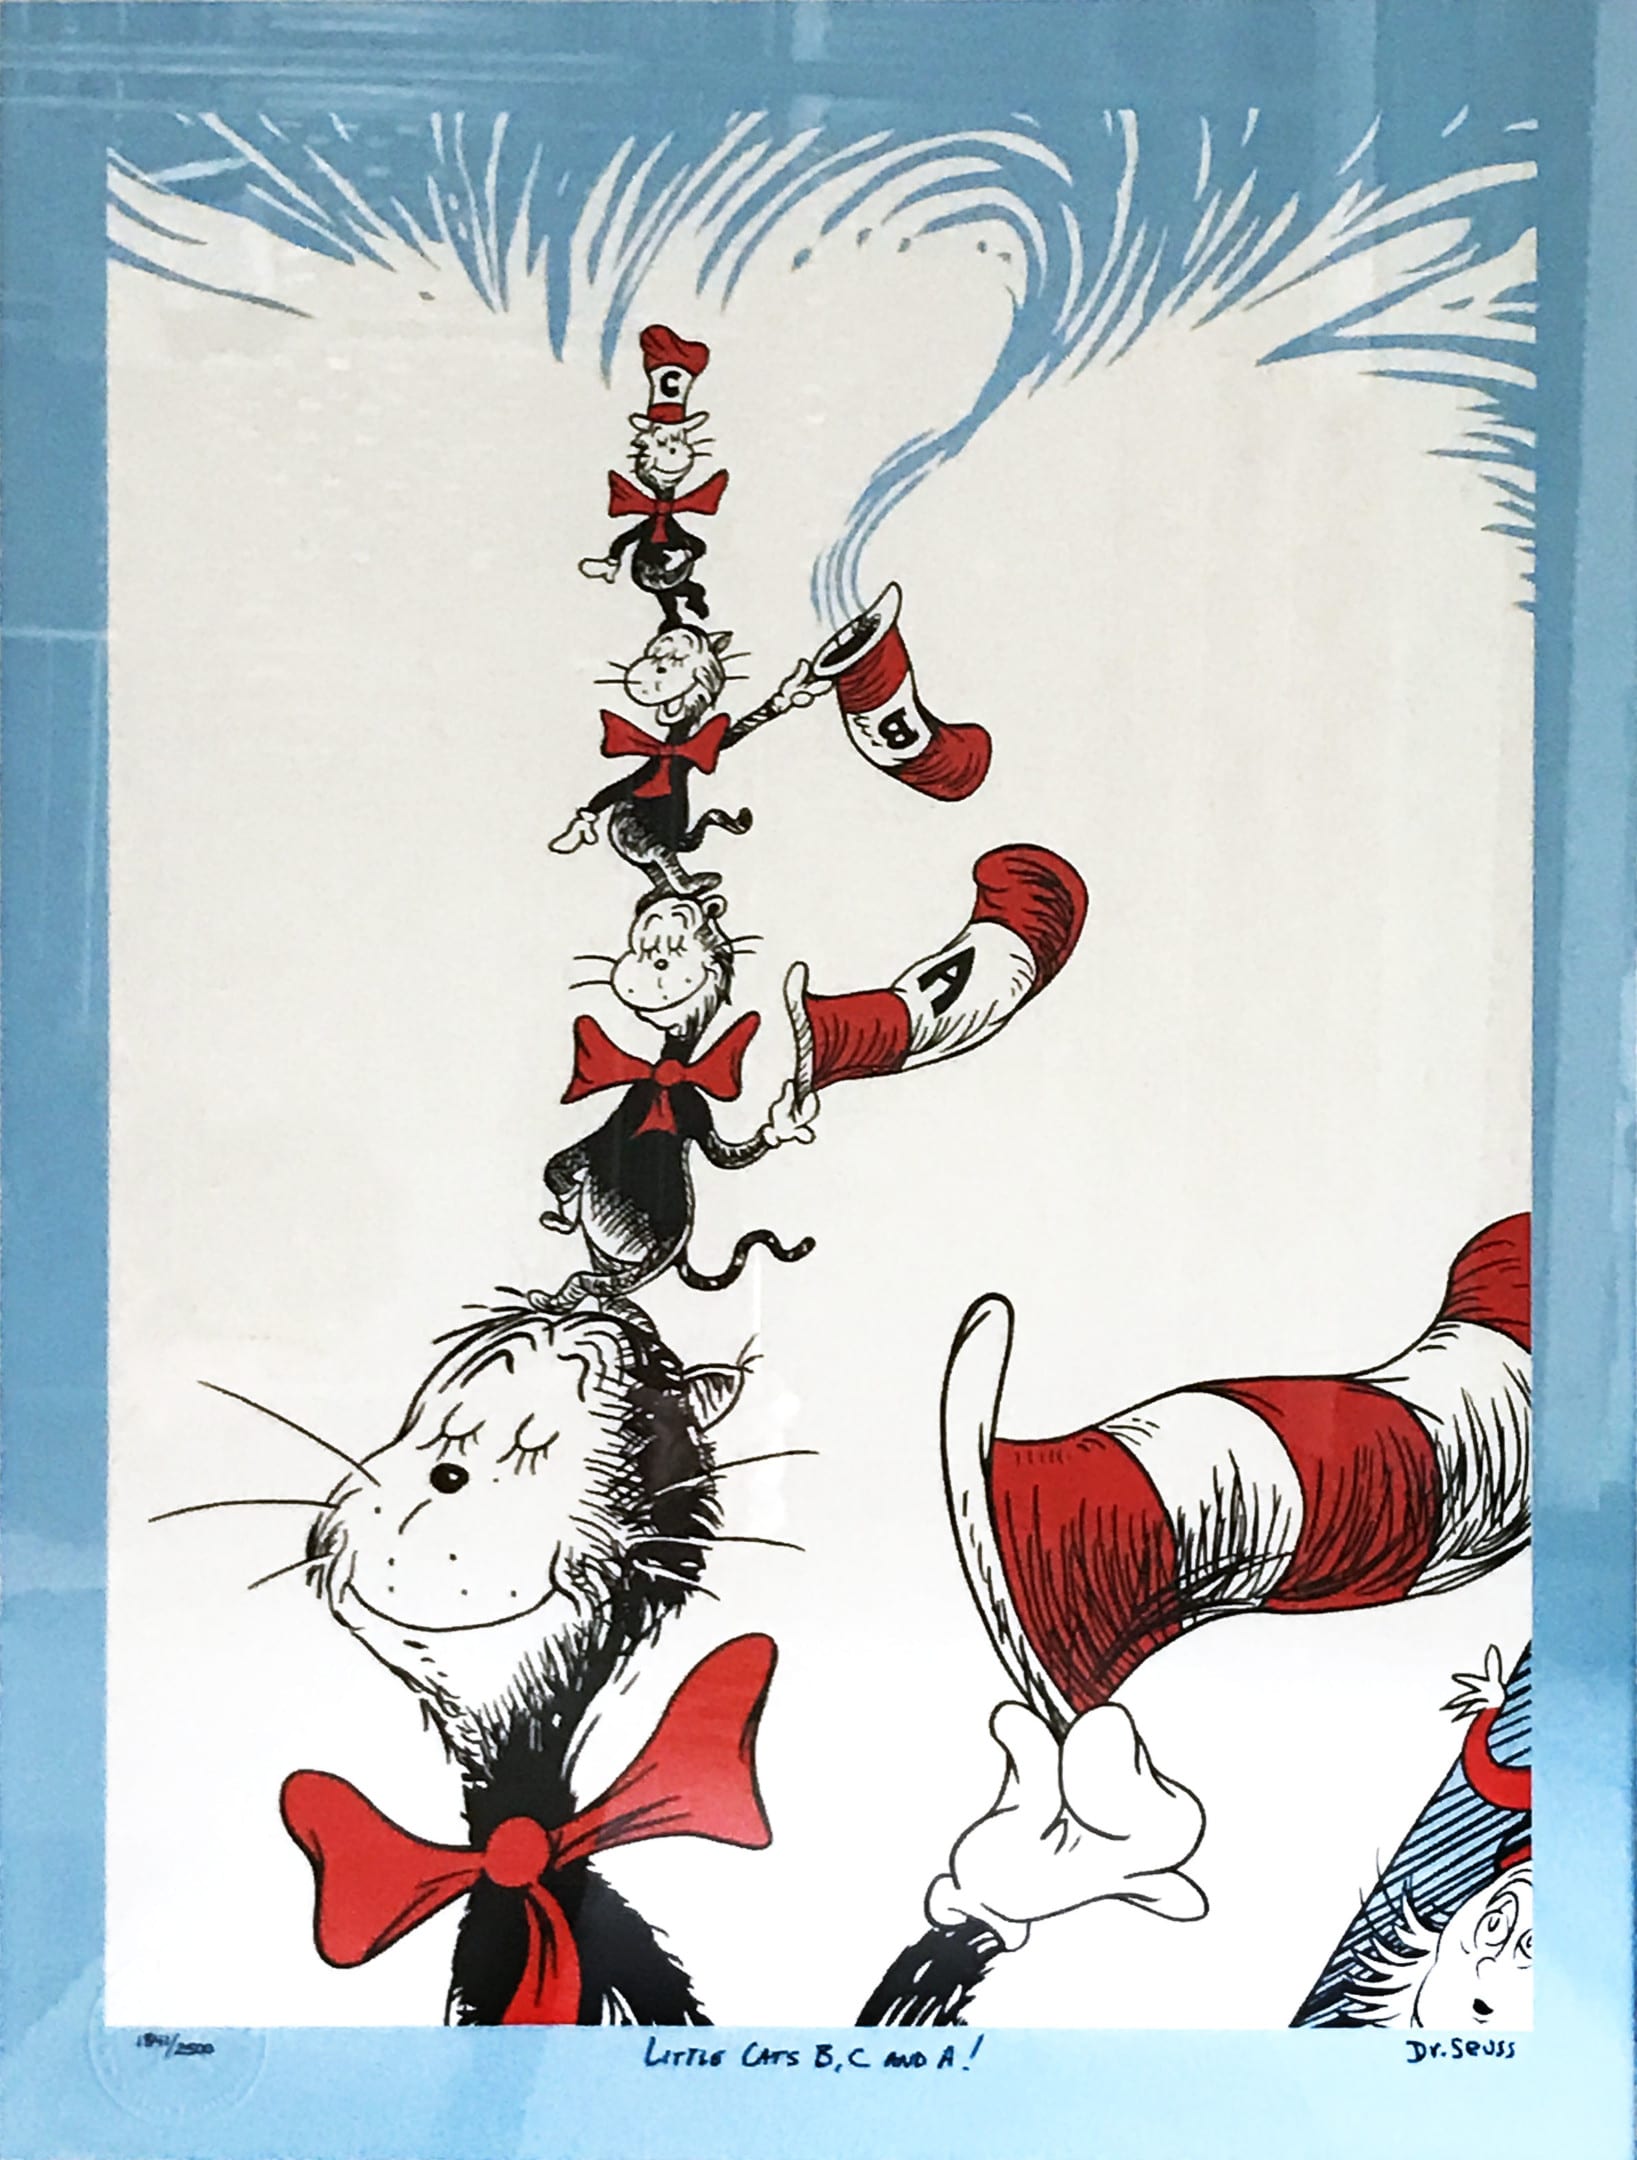 Dr Seuss - Little Cats A B and C ~ Prints ~ Mobile Art Gallery